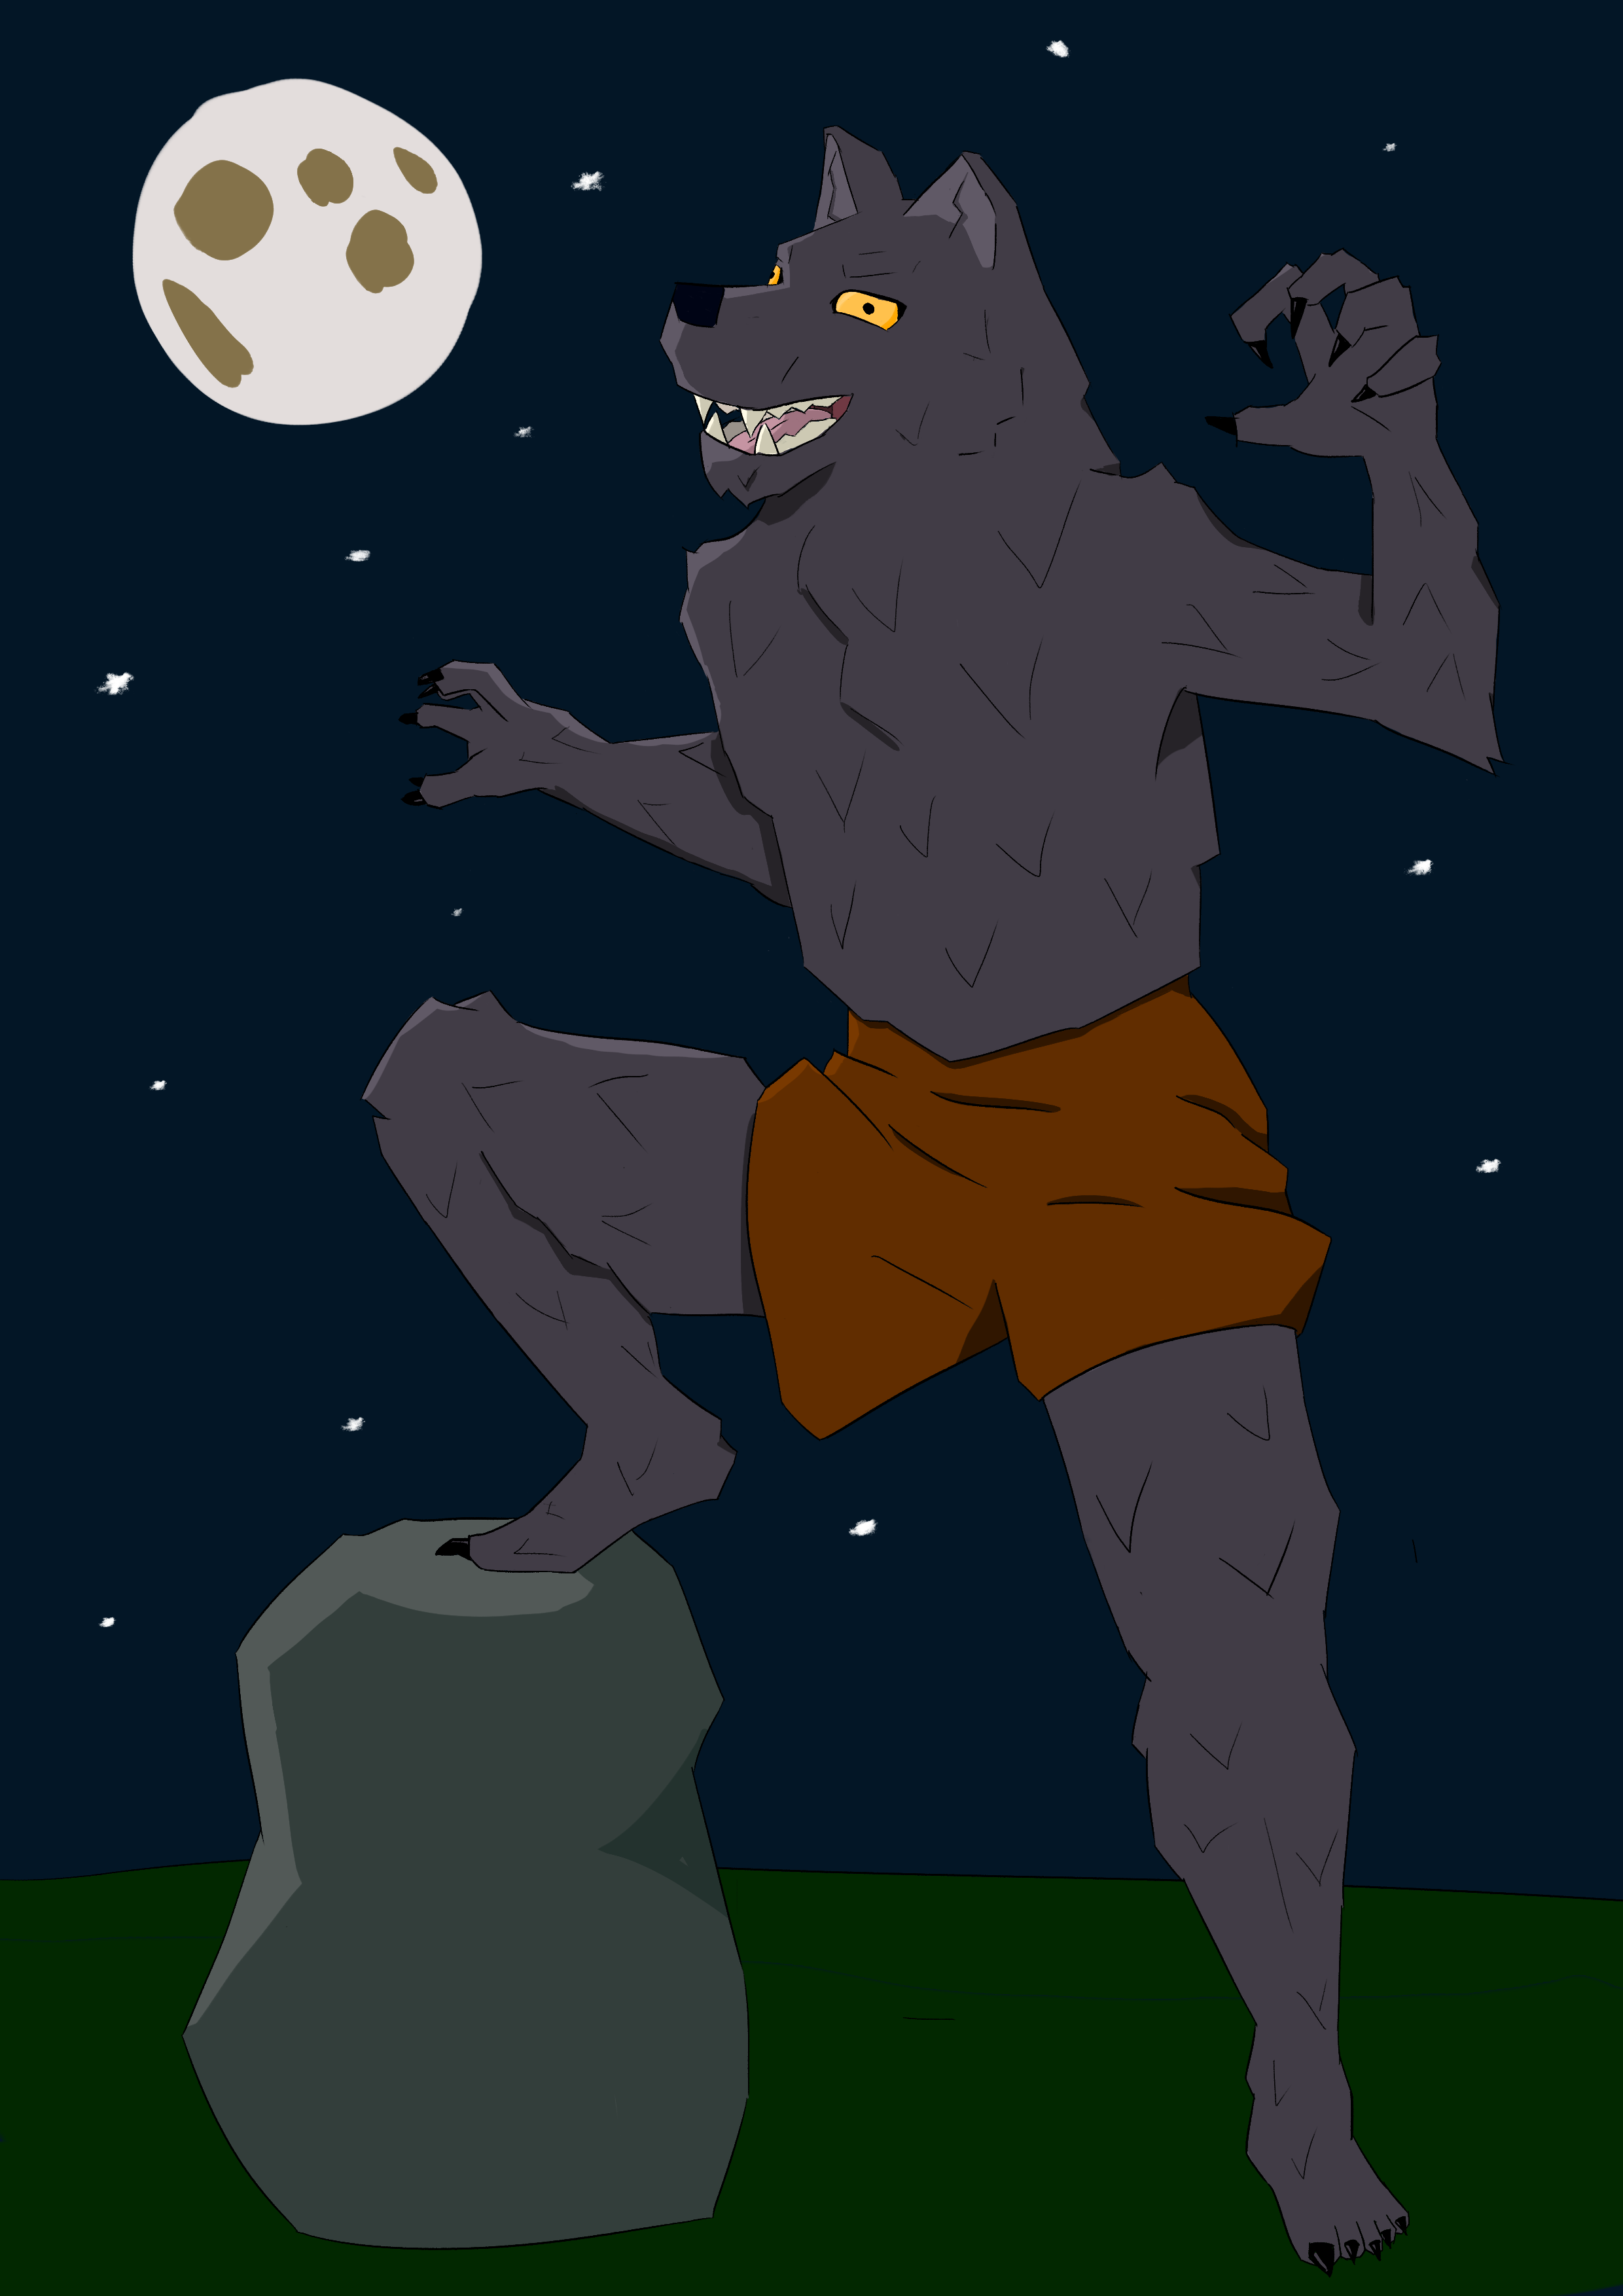 A digital drawing of a werewolf in front of a background of night sky